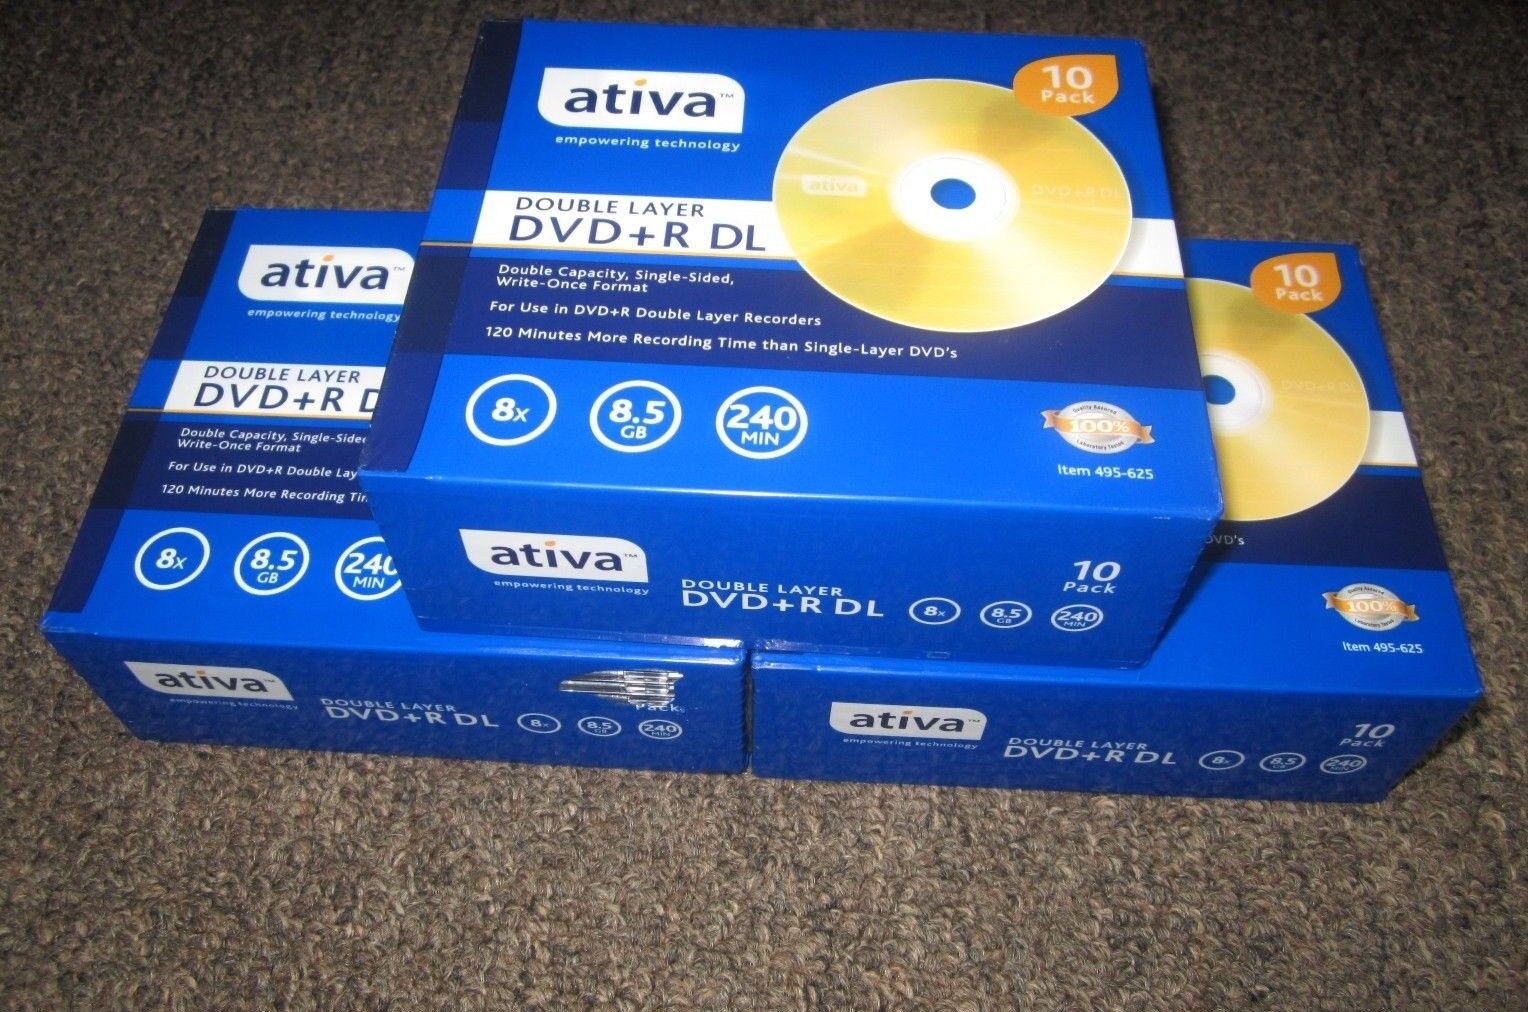 LOT OF 3 x New ativa DOUBLE LAYER DVD+R DL 10 Pack 8x 8.5GB 240 MIN